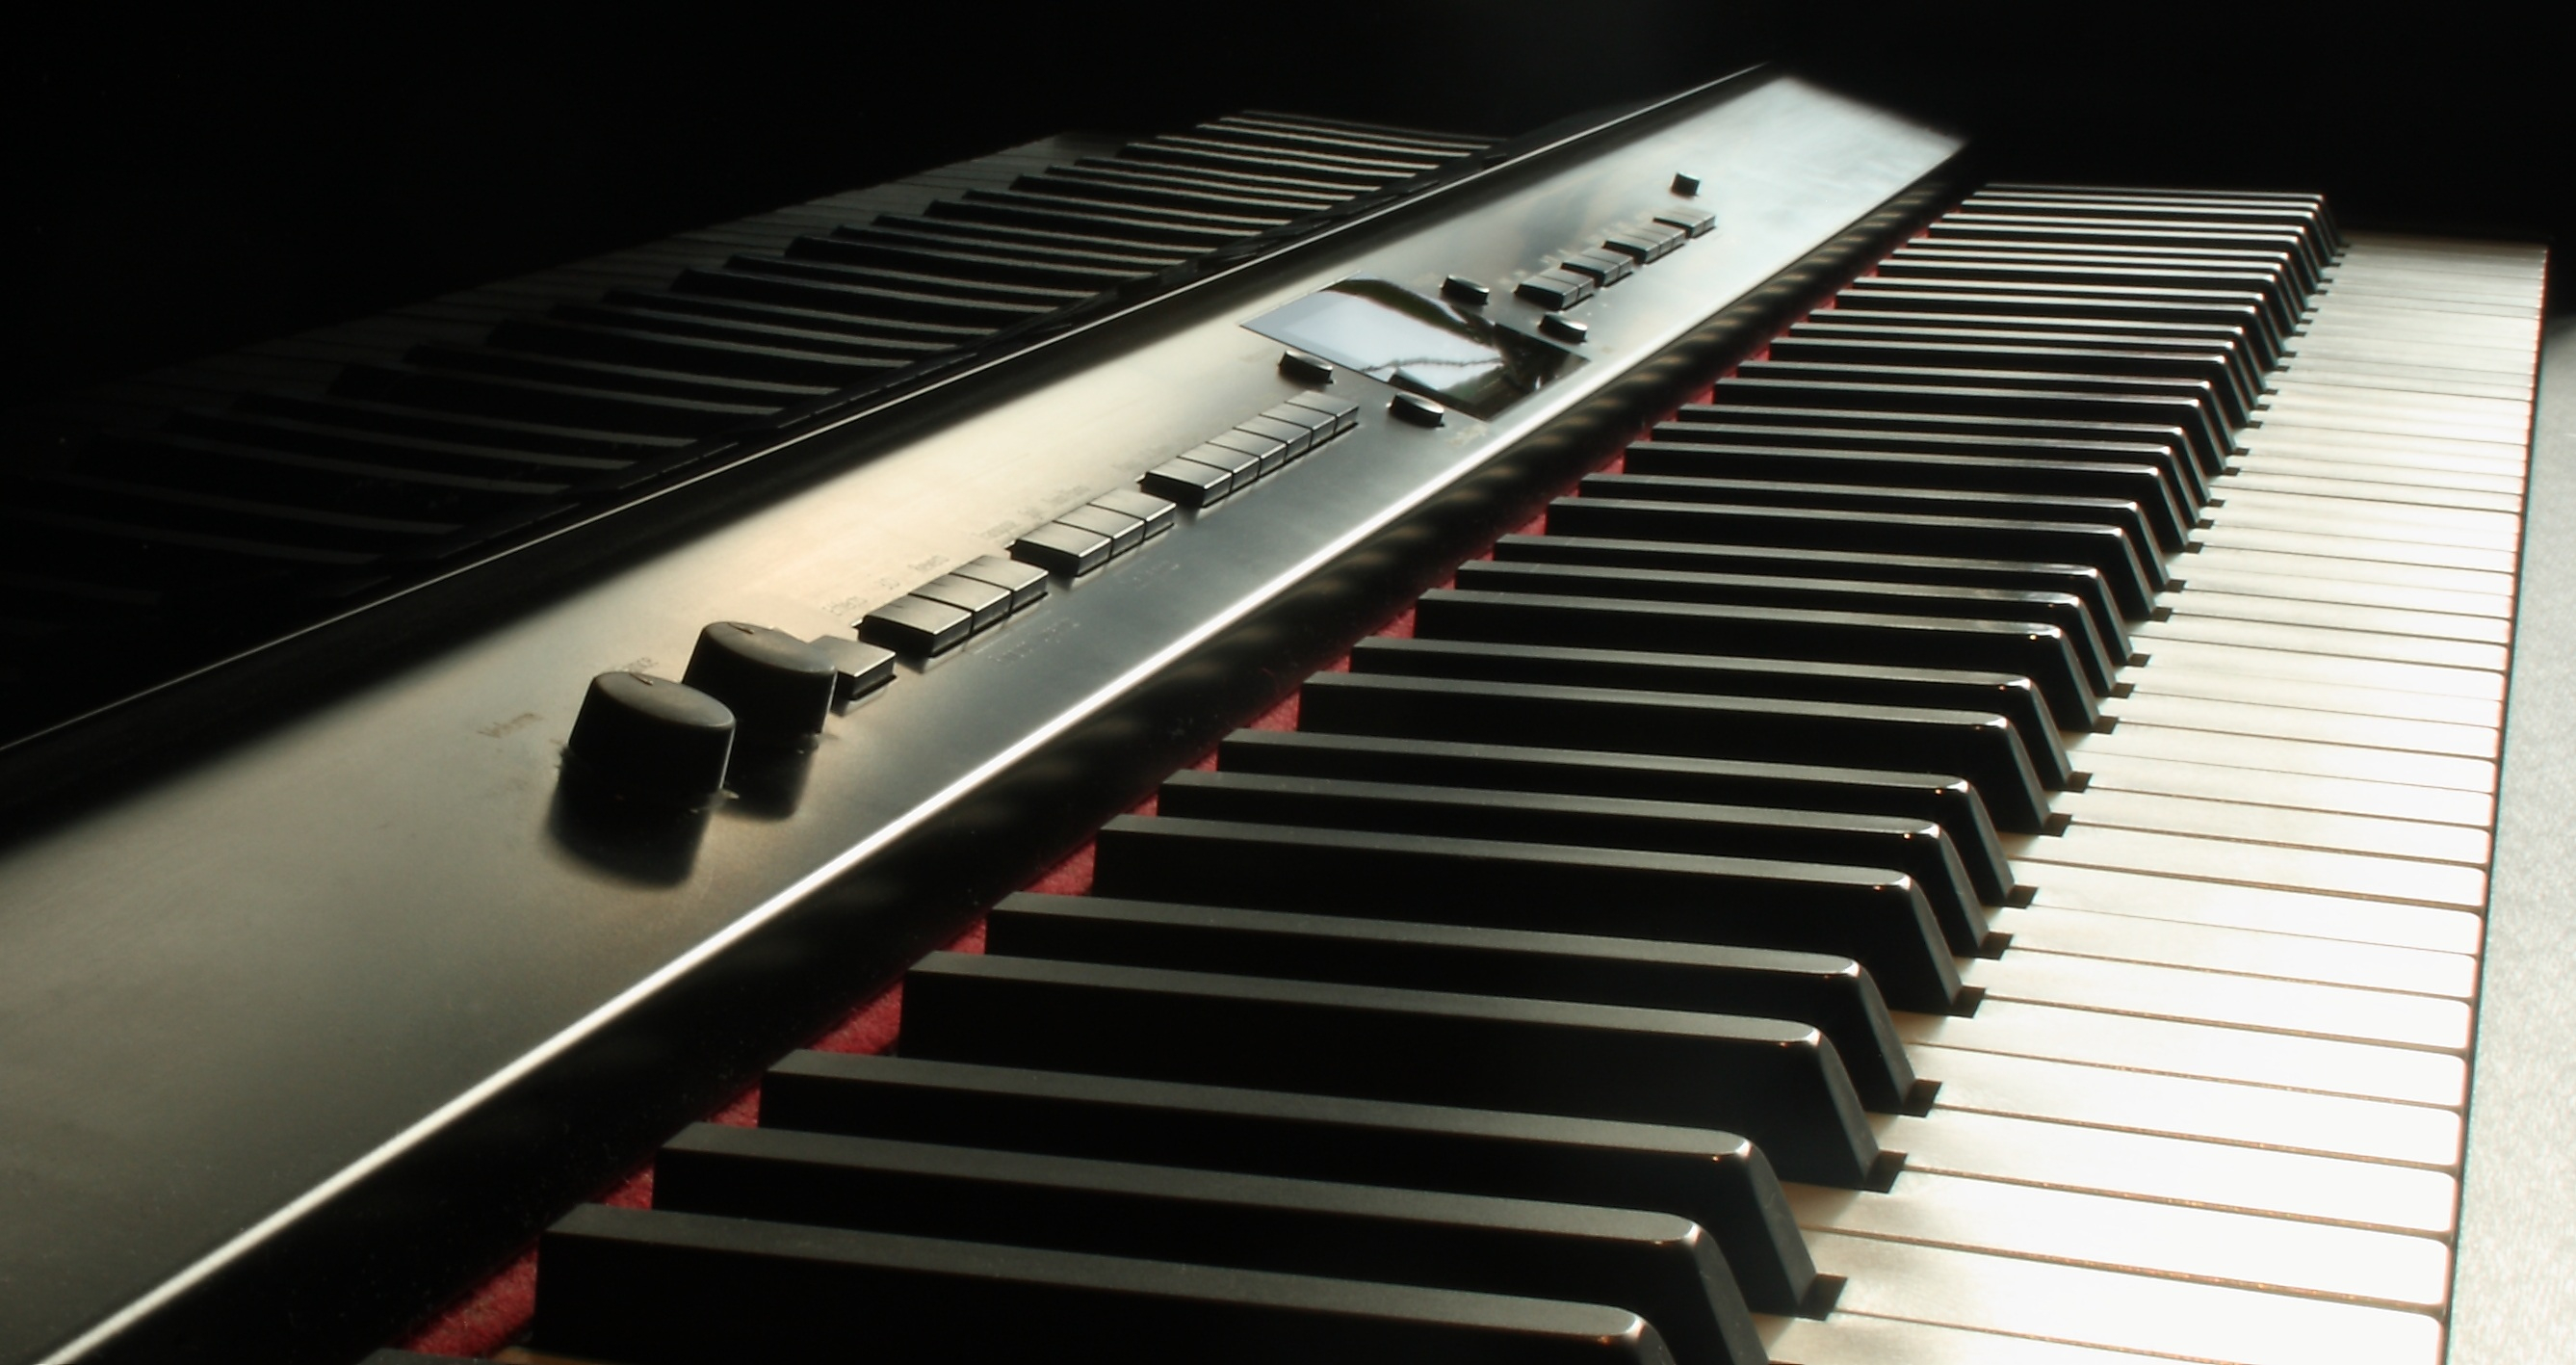 Buy Pianos - Digital for Beginners and Professionals 